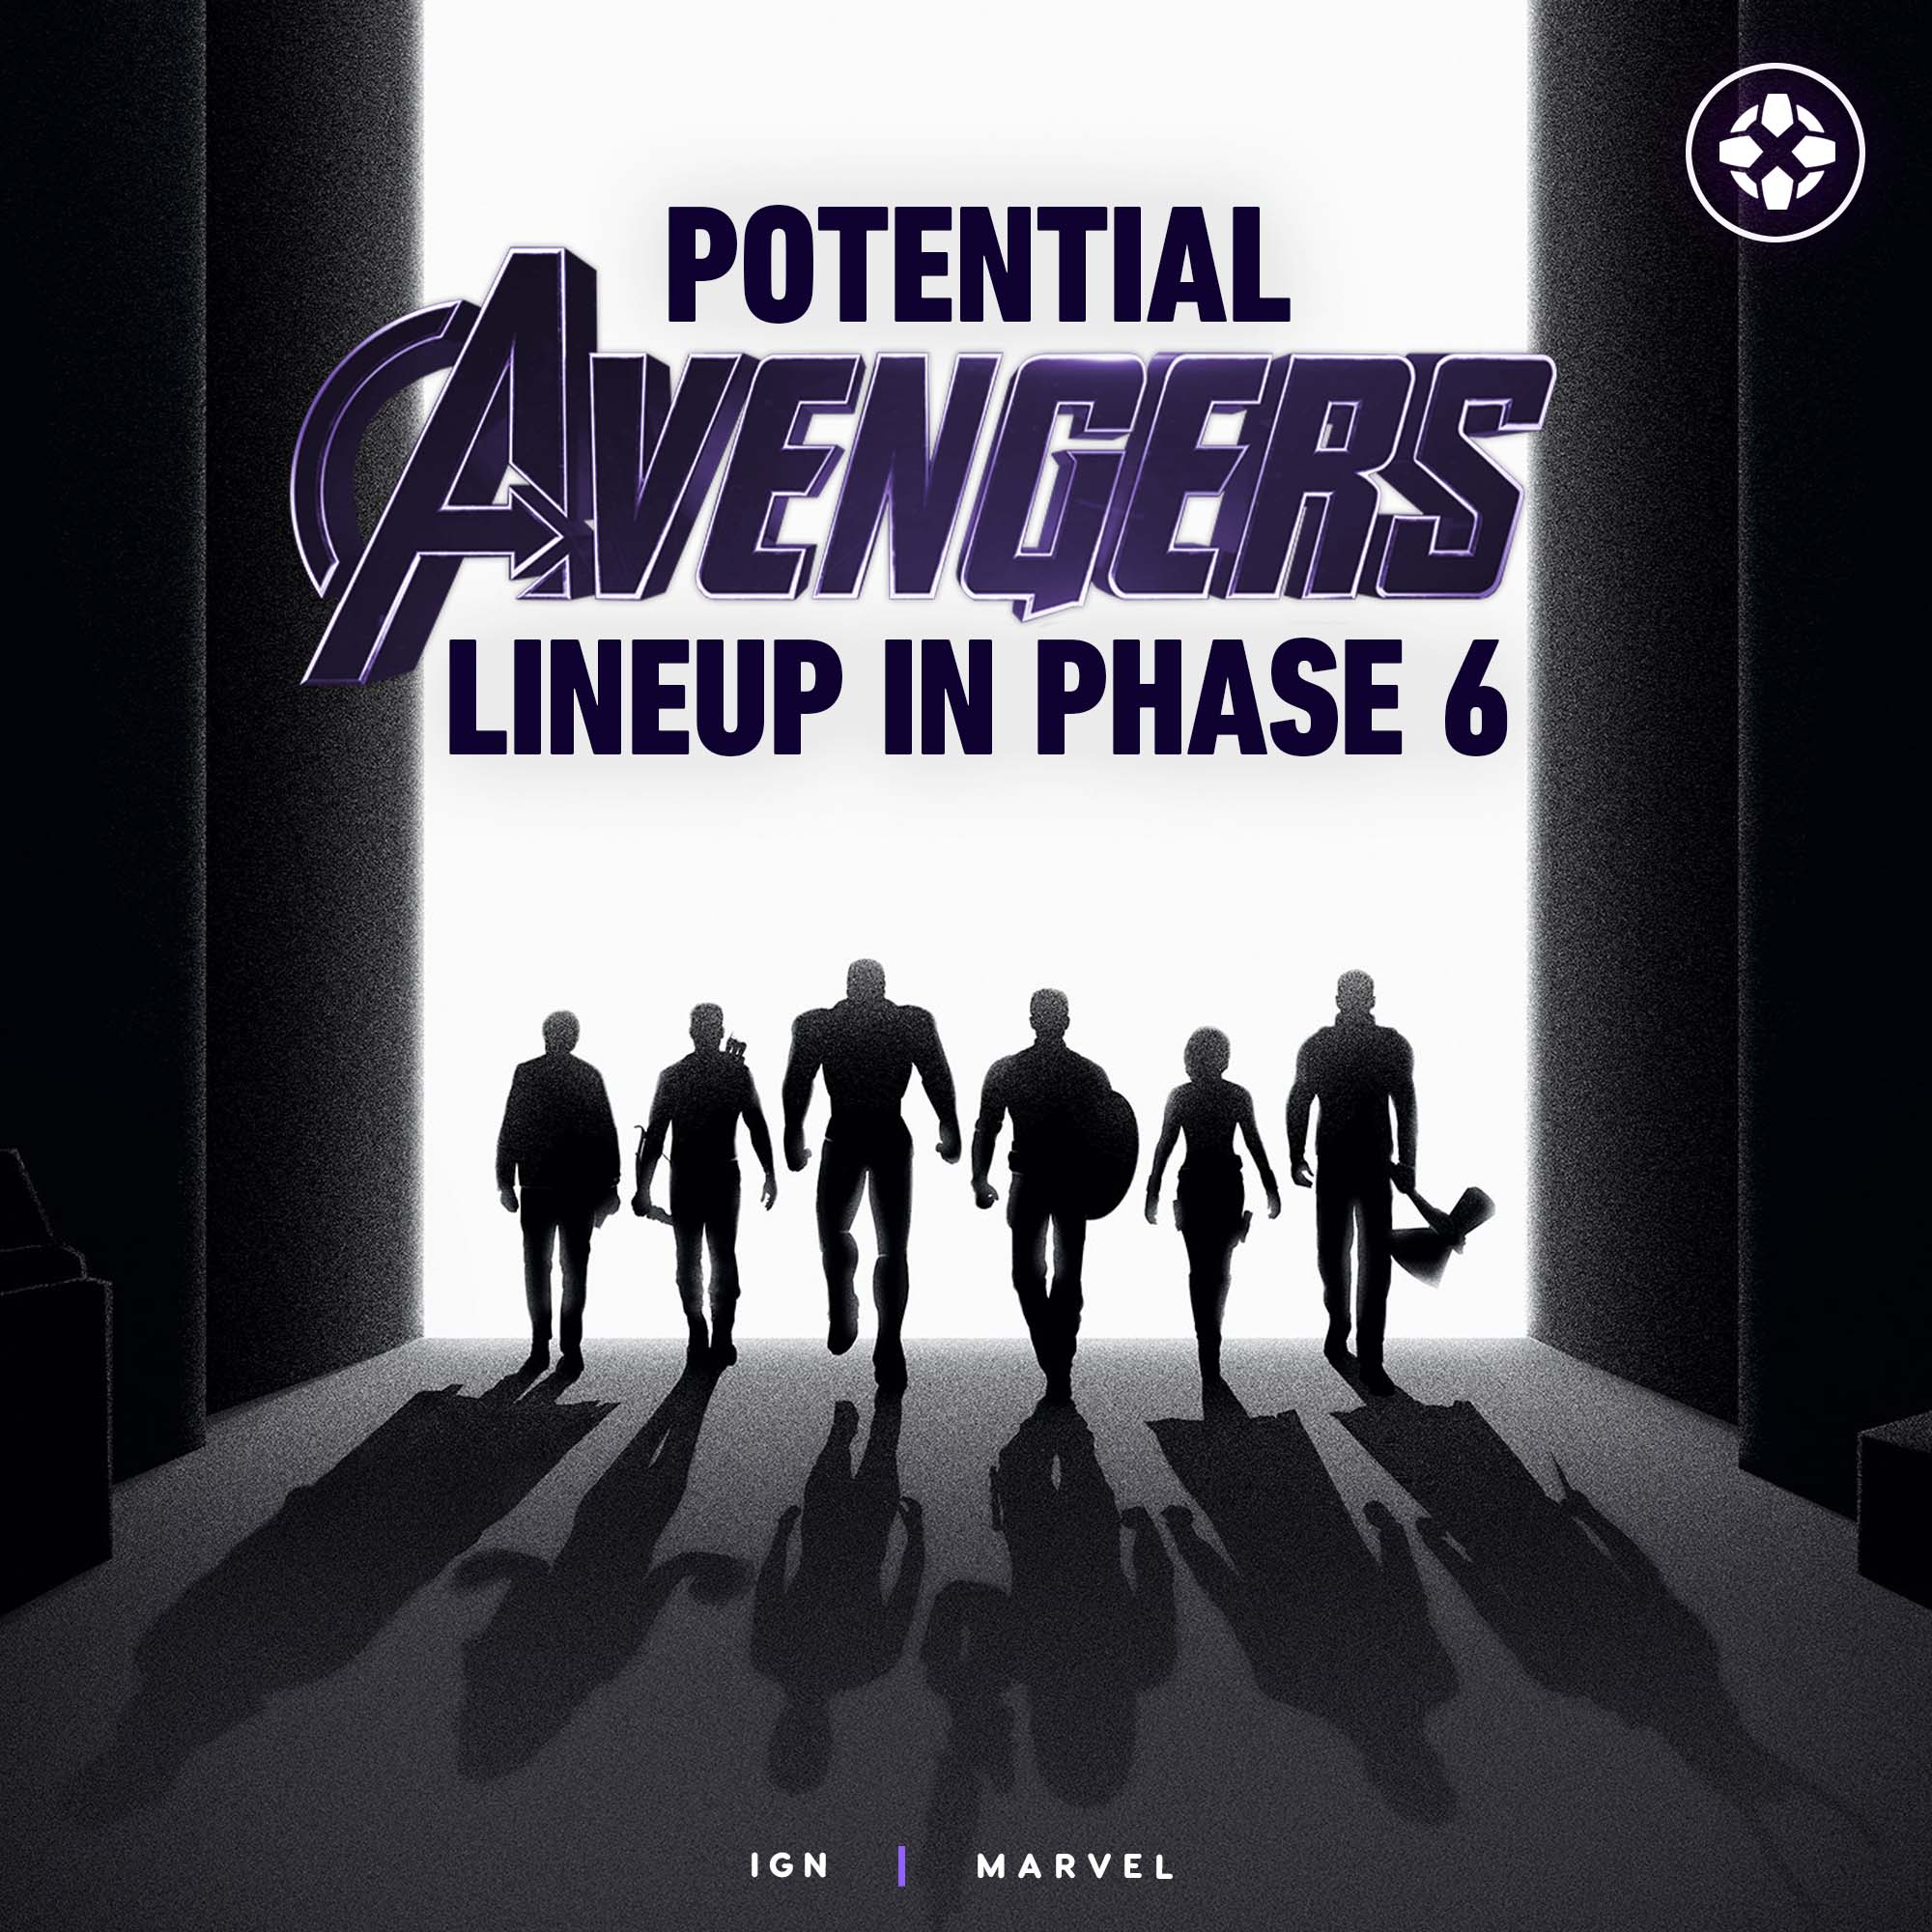 Potential Avengers Lineup in Phase 6. Swipe!